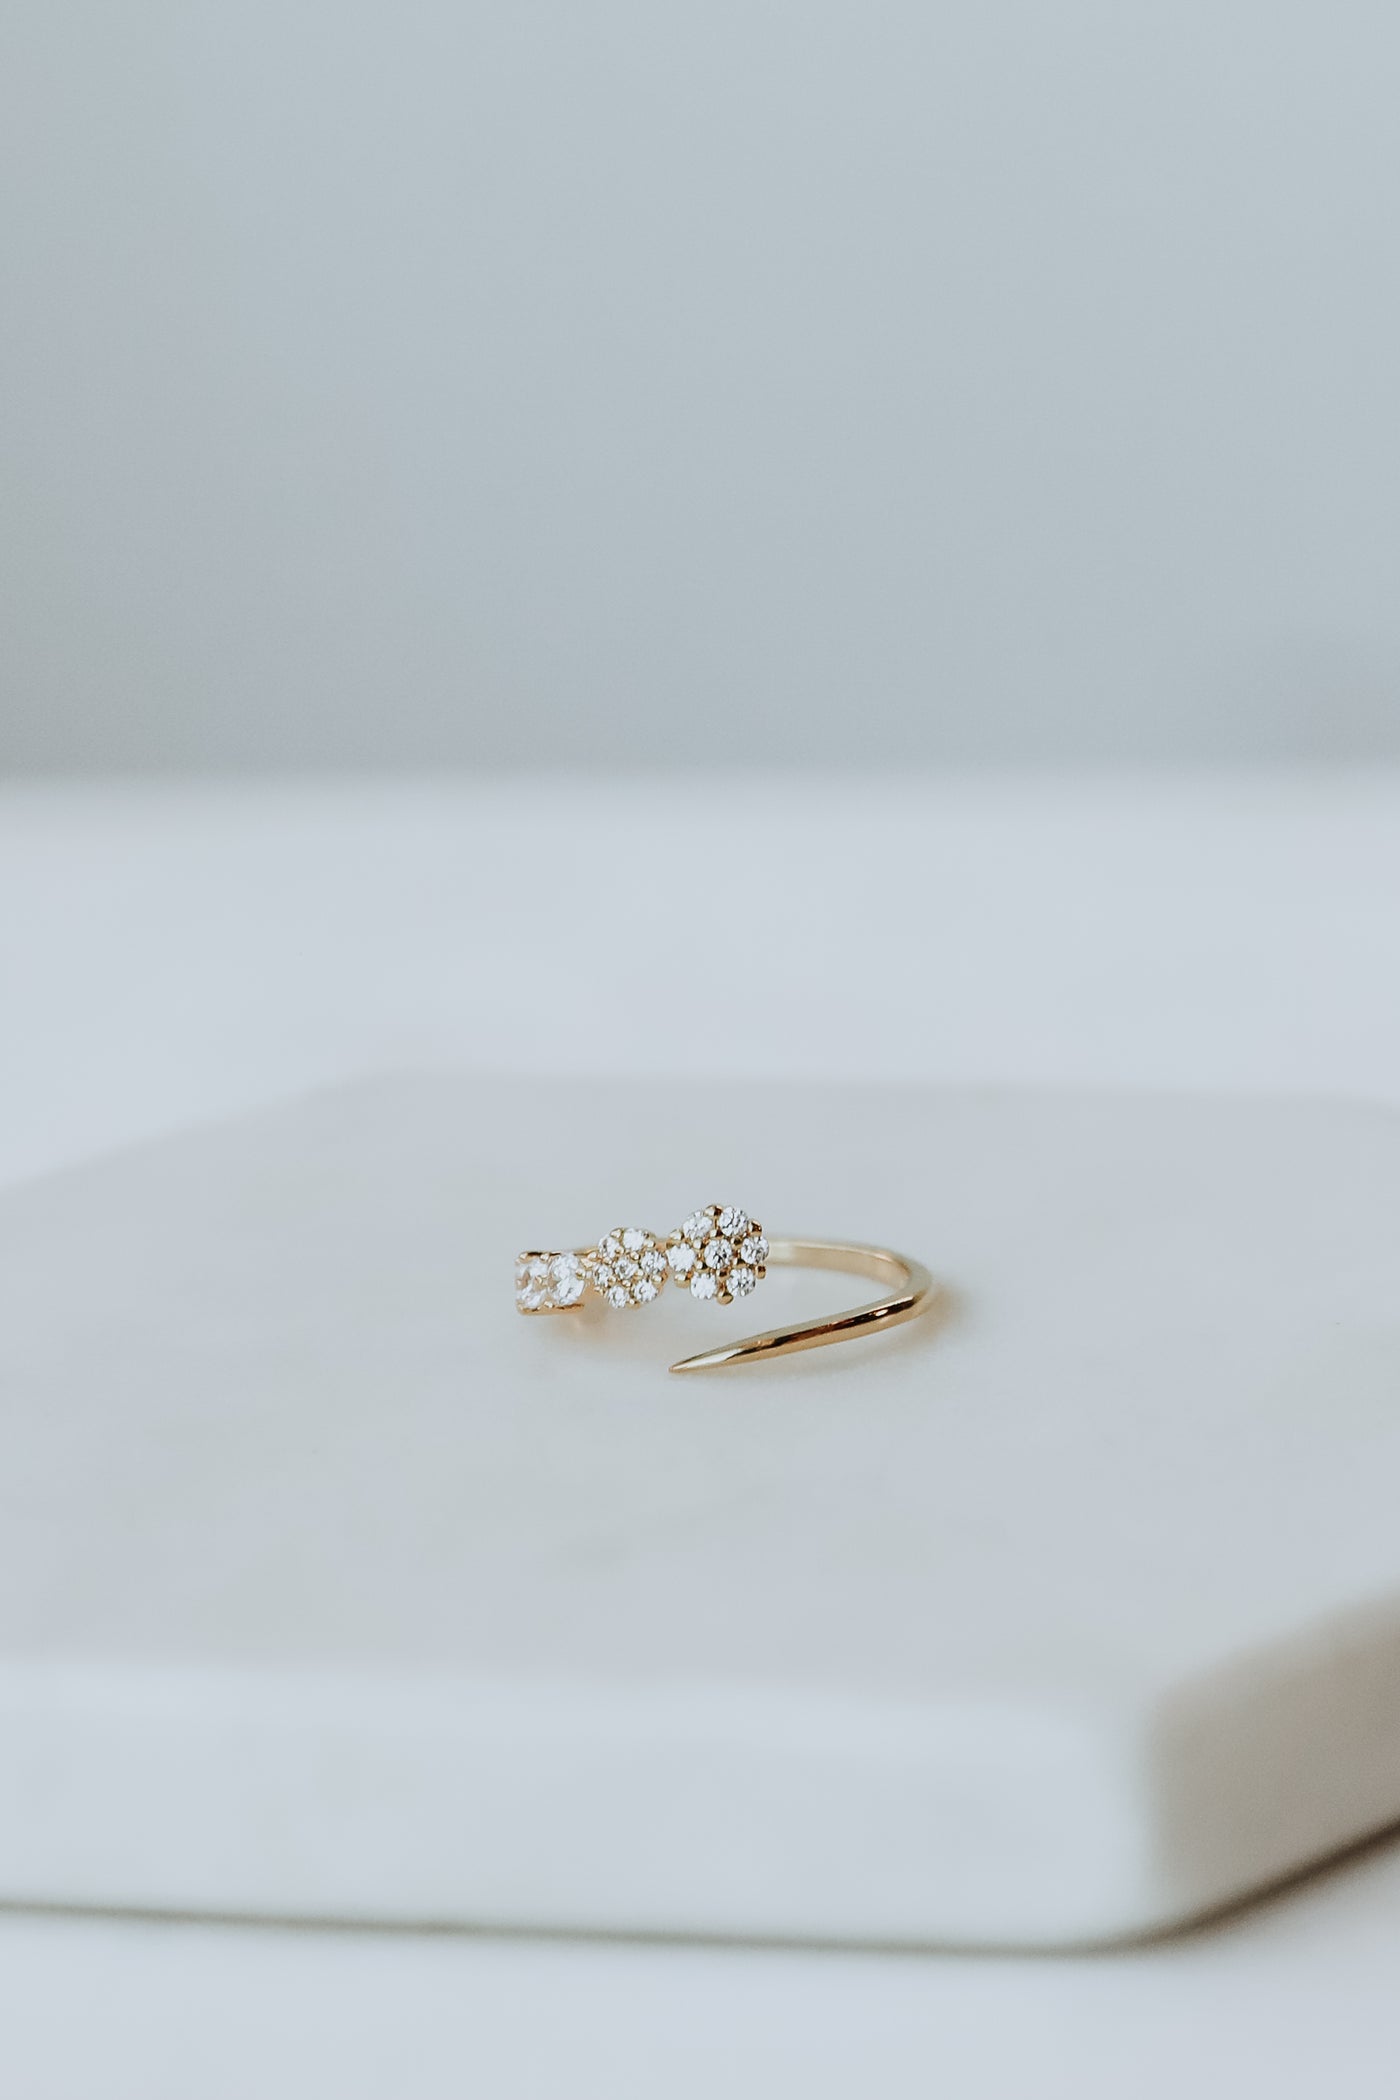 Gold Rhinestone Ring from dress up